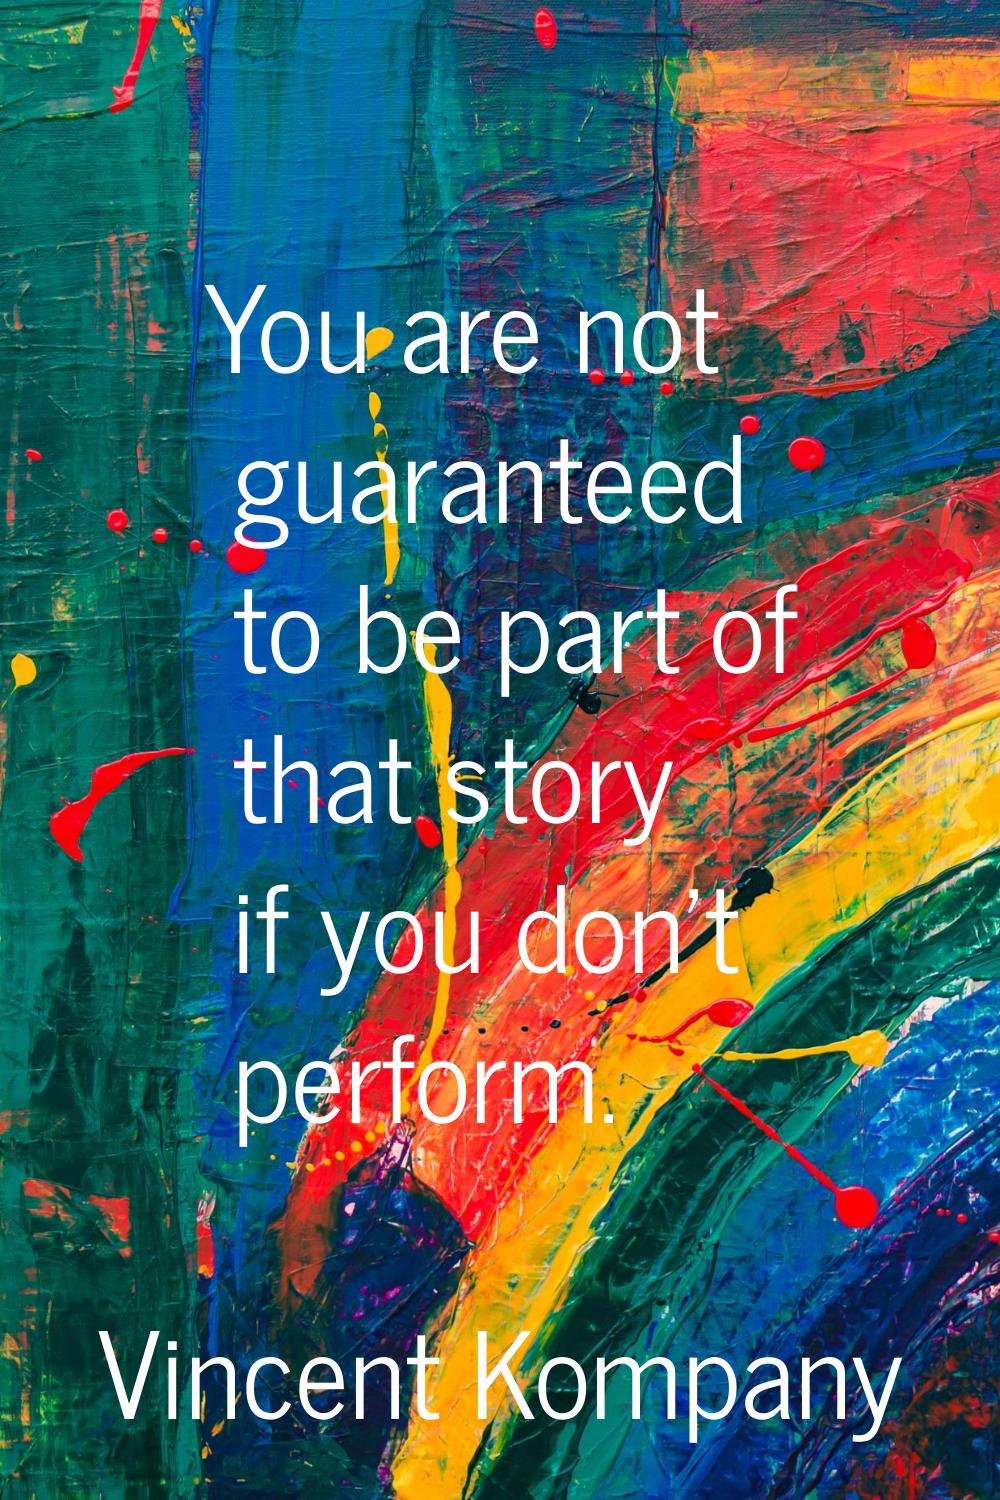 You are not guaranteed to be part of that story if you don't perform.